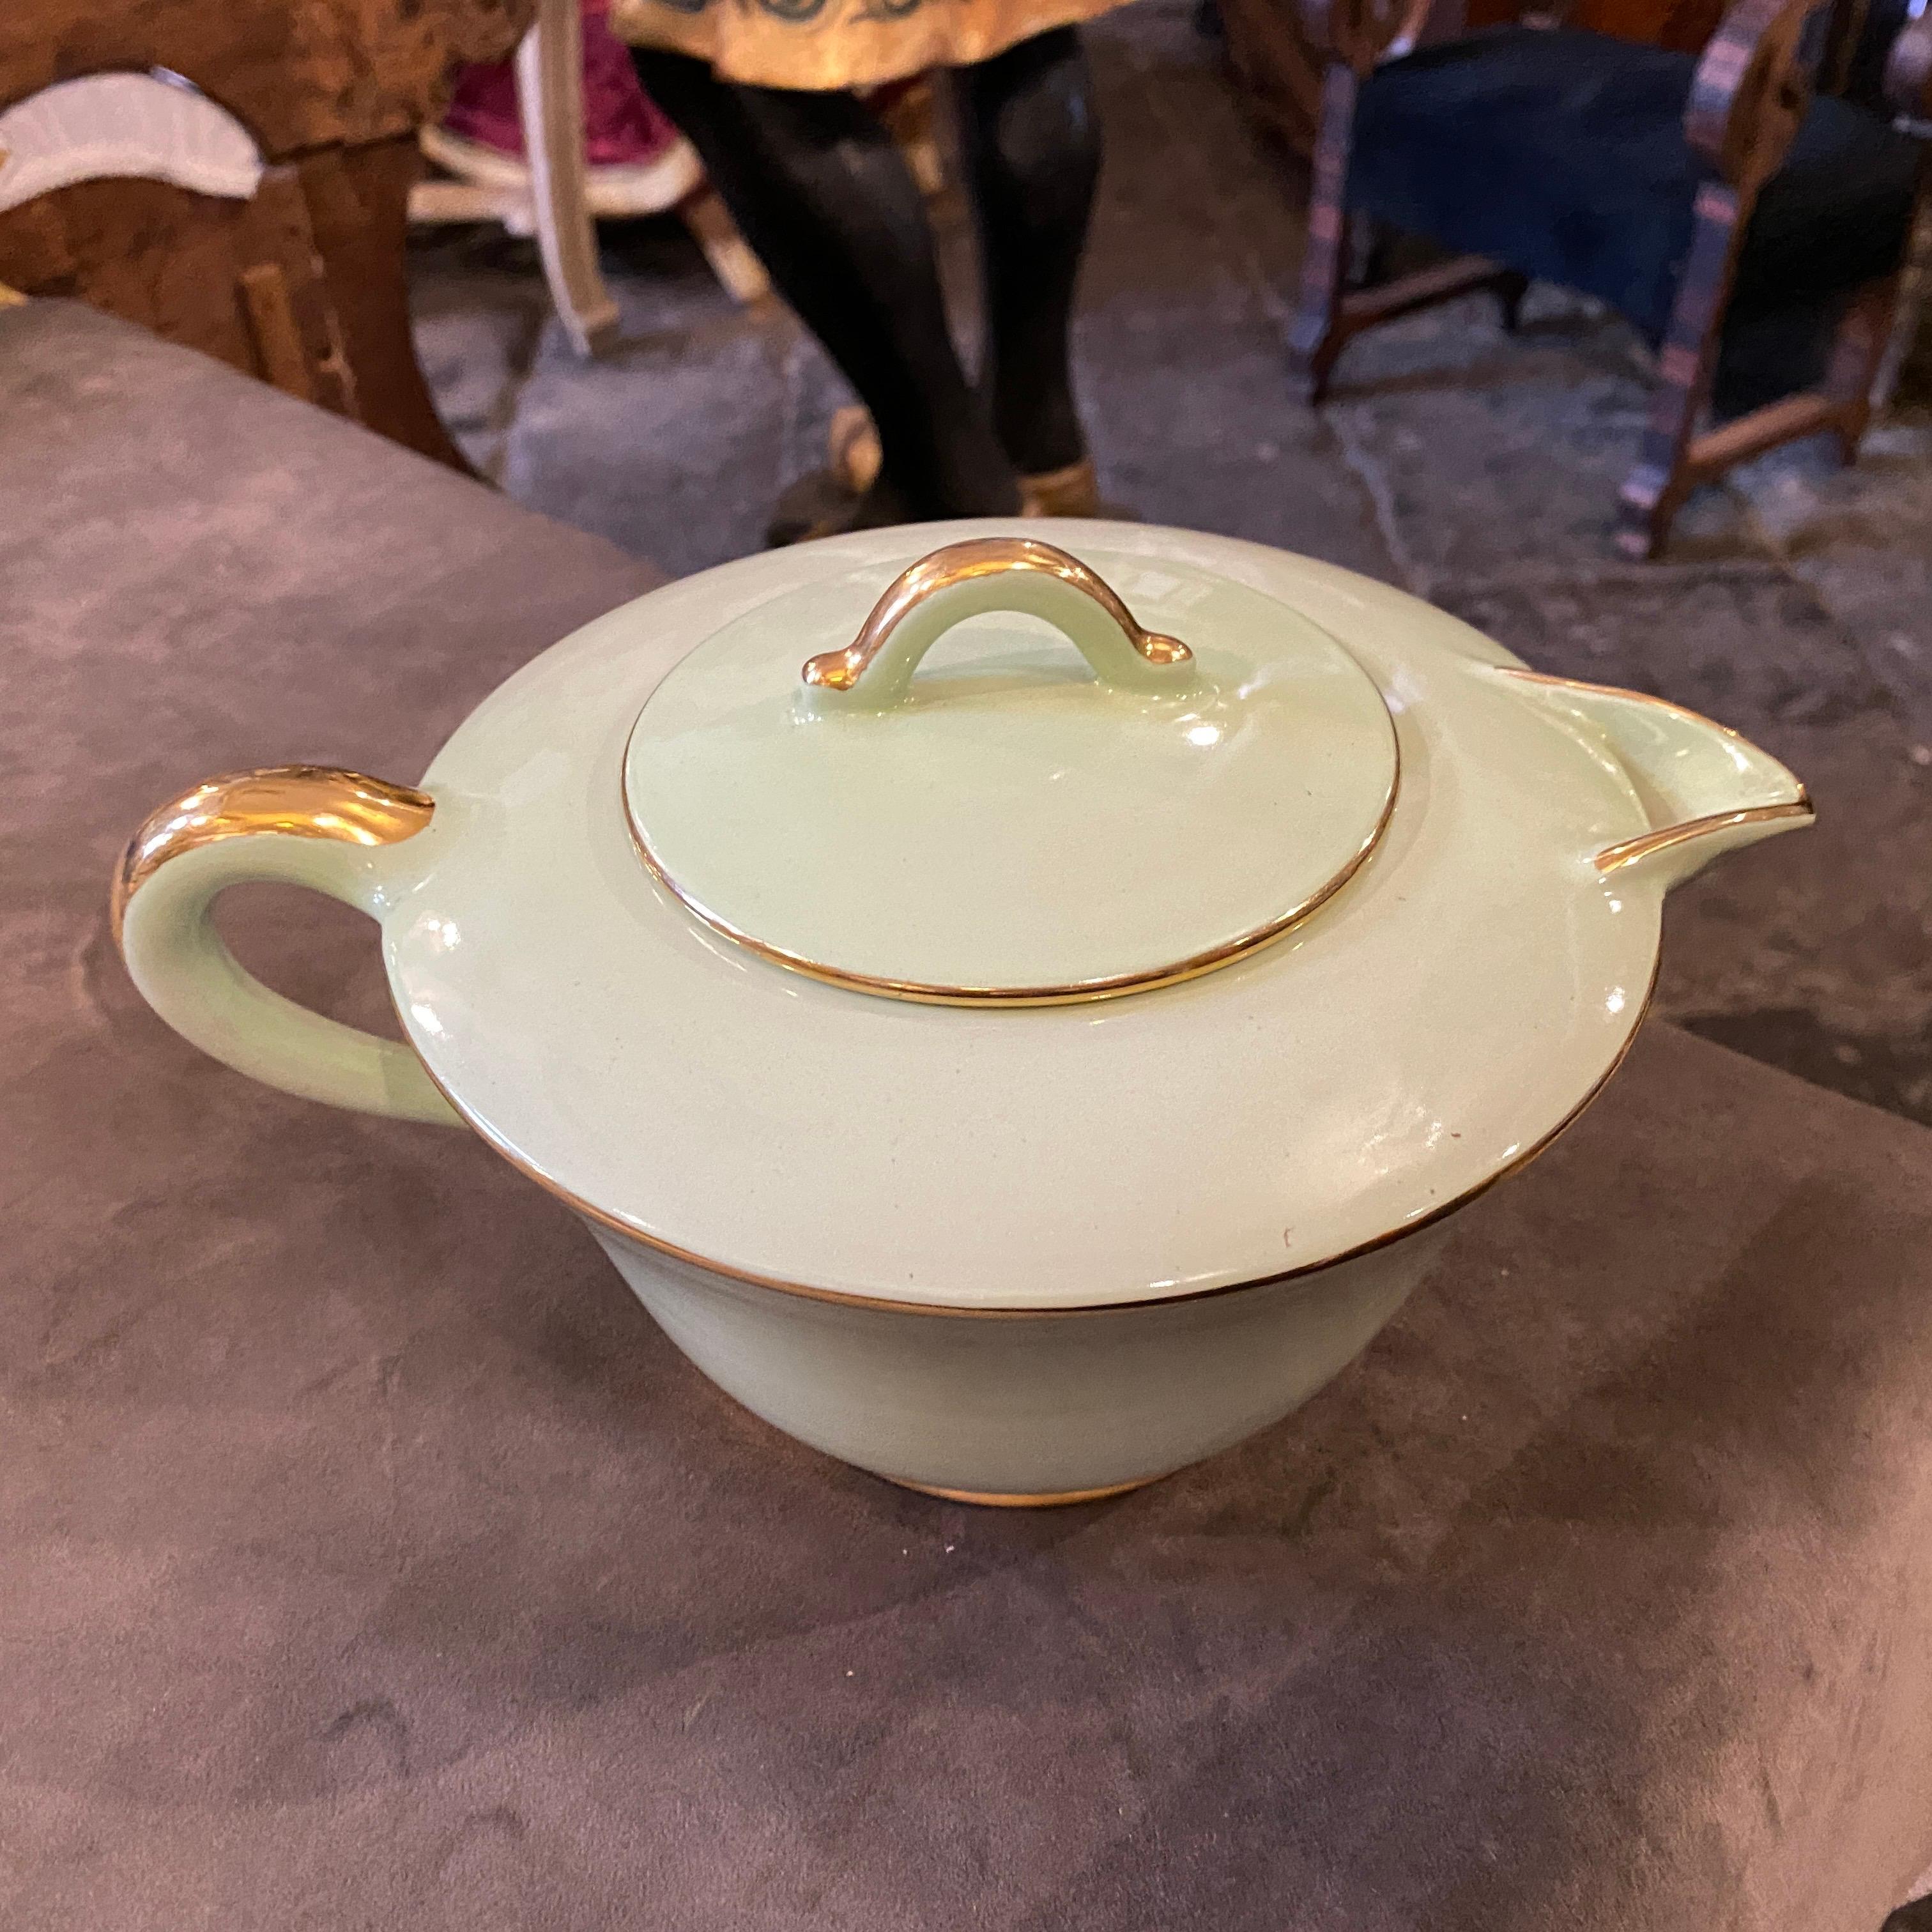 An elegant mid-century modern light green and gold ceramic tea pot designed and manufactured by Pucci in the Sixties. It's signed on the bottom. The design of the tea pot is characterized by its clean, geometric lines and minimalist aesthetic,